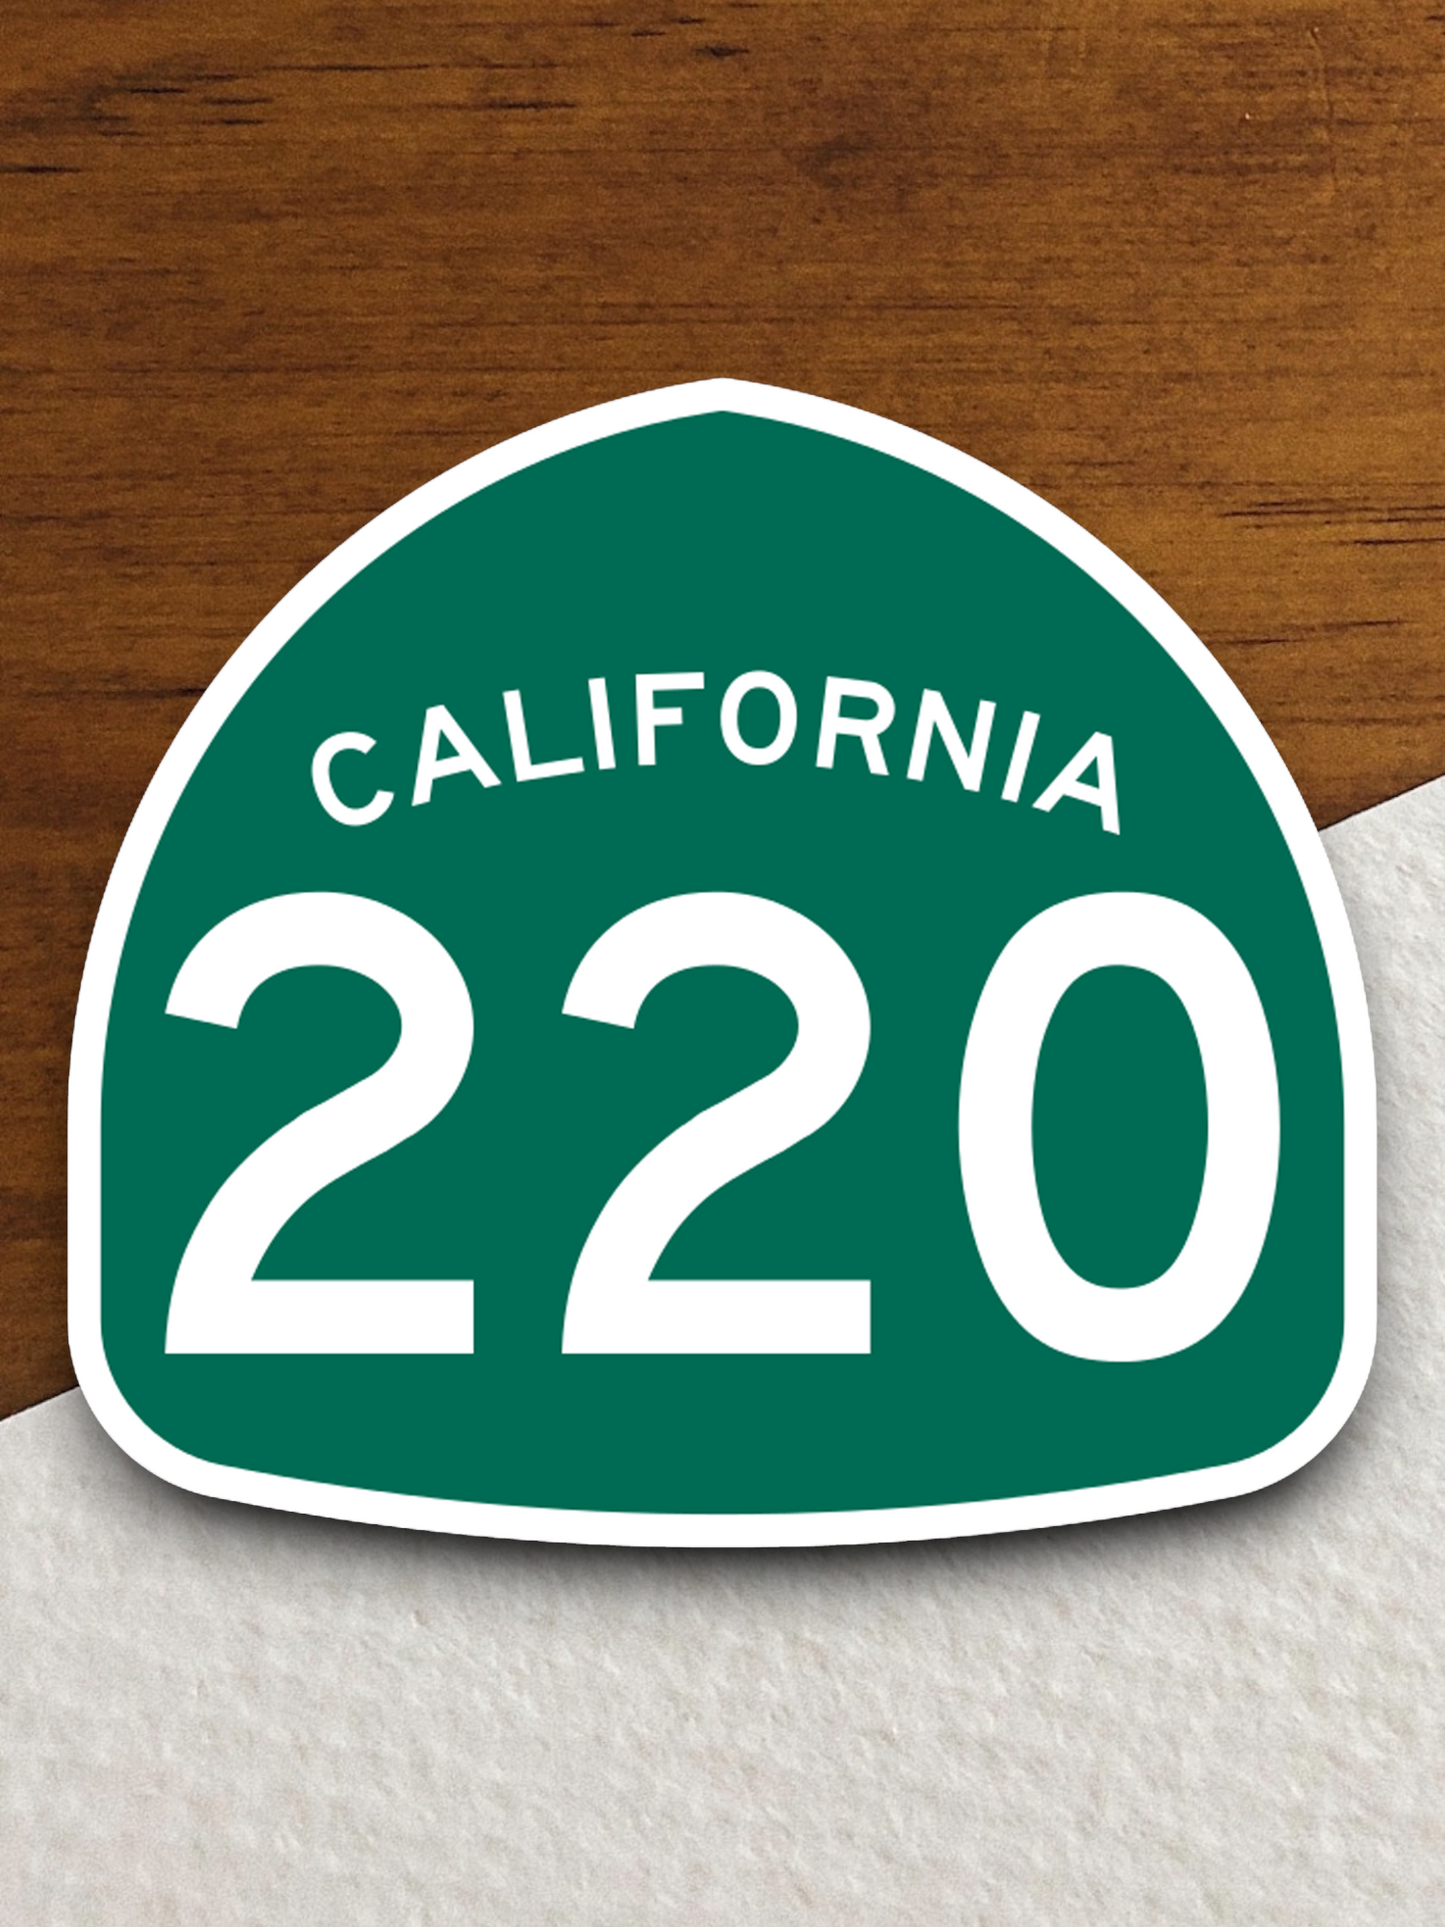 California State Route 220 Road Sign Sticker